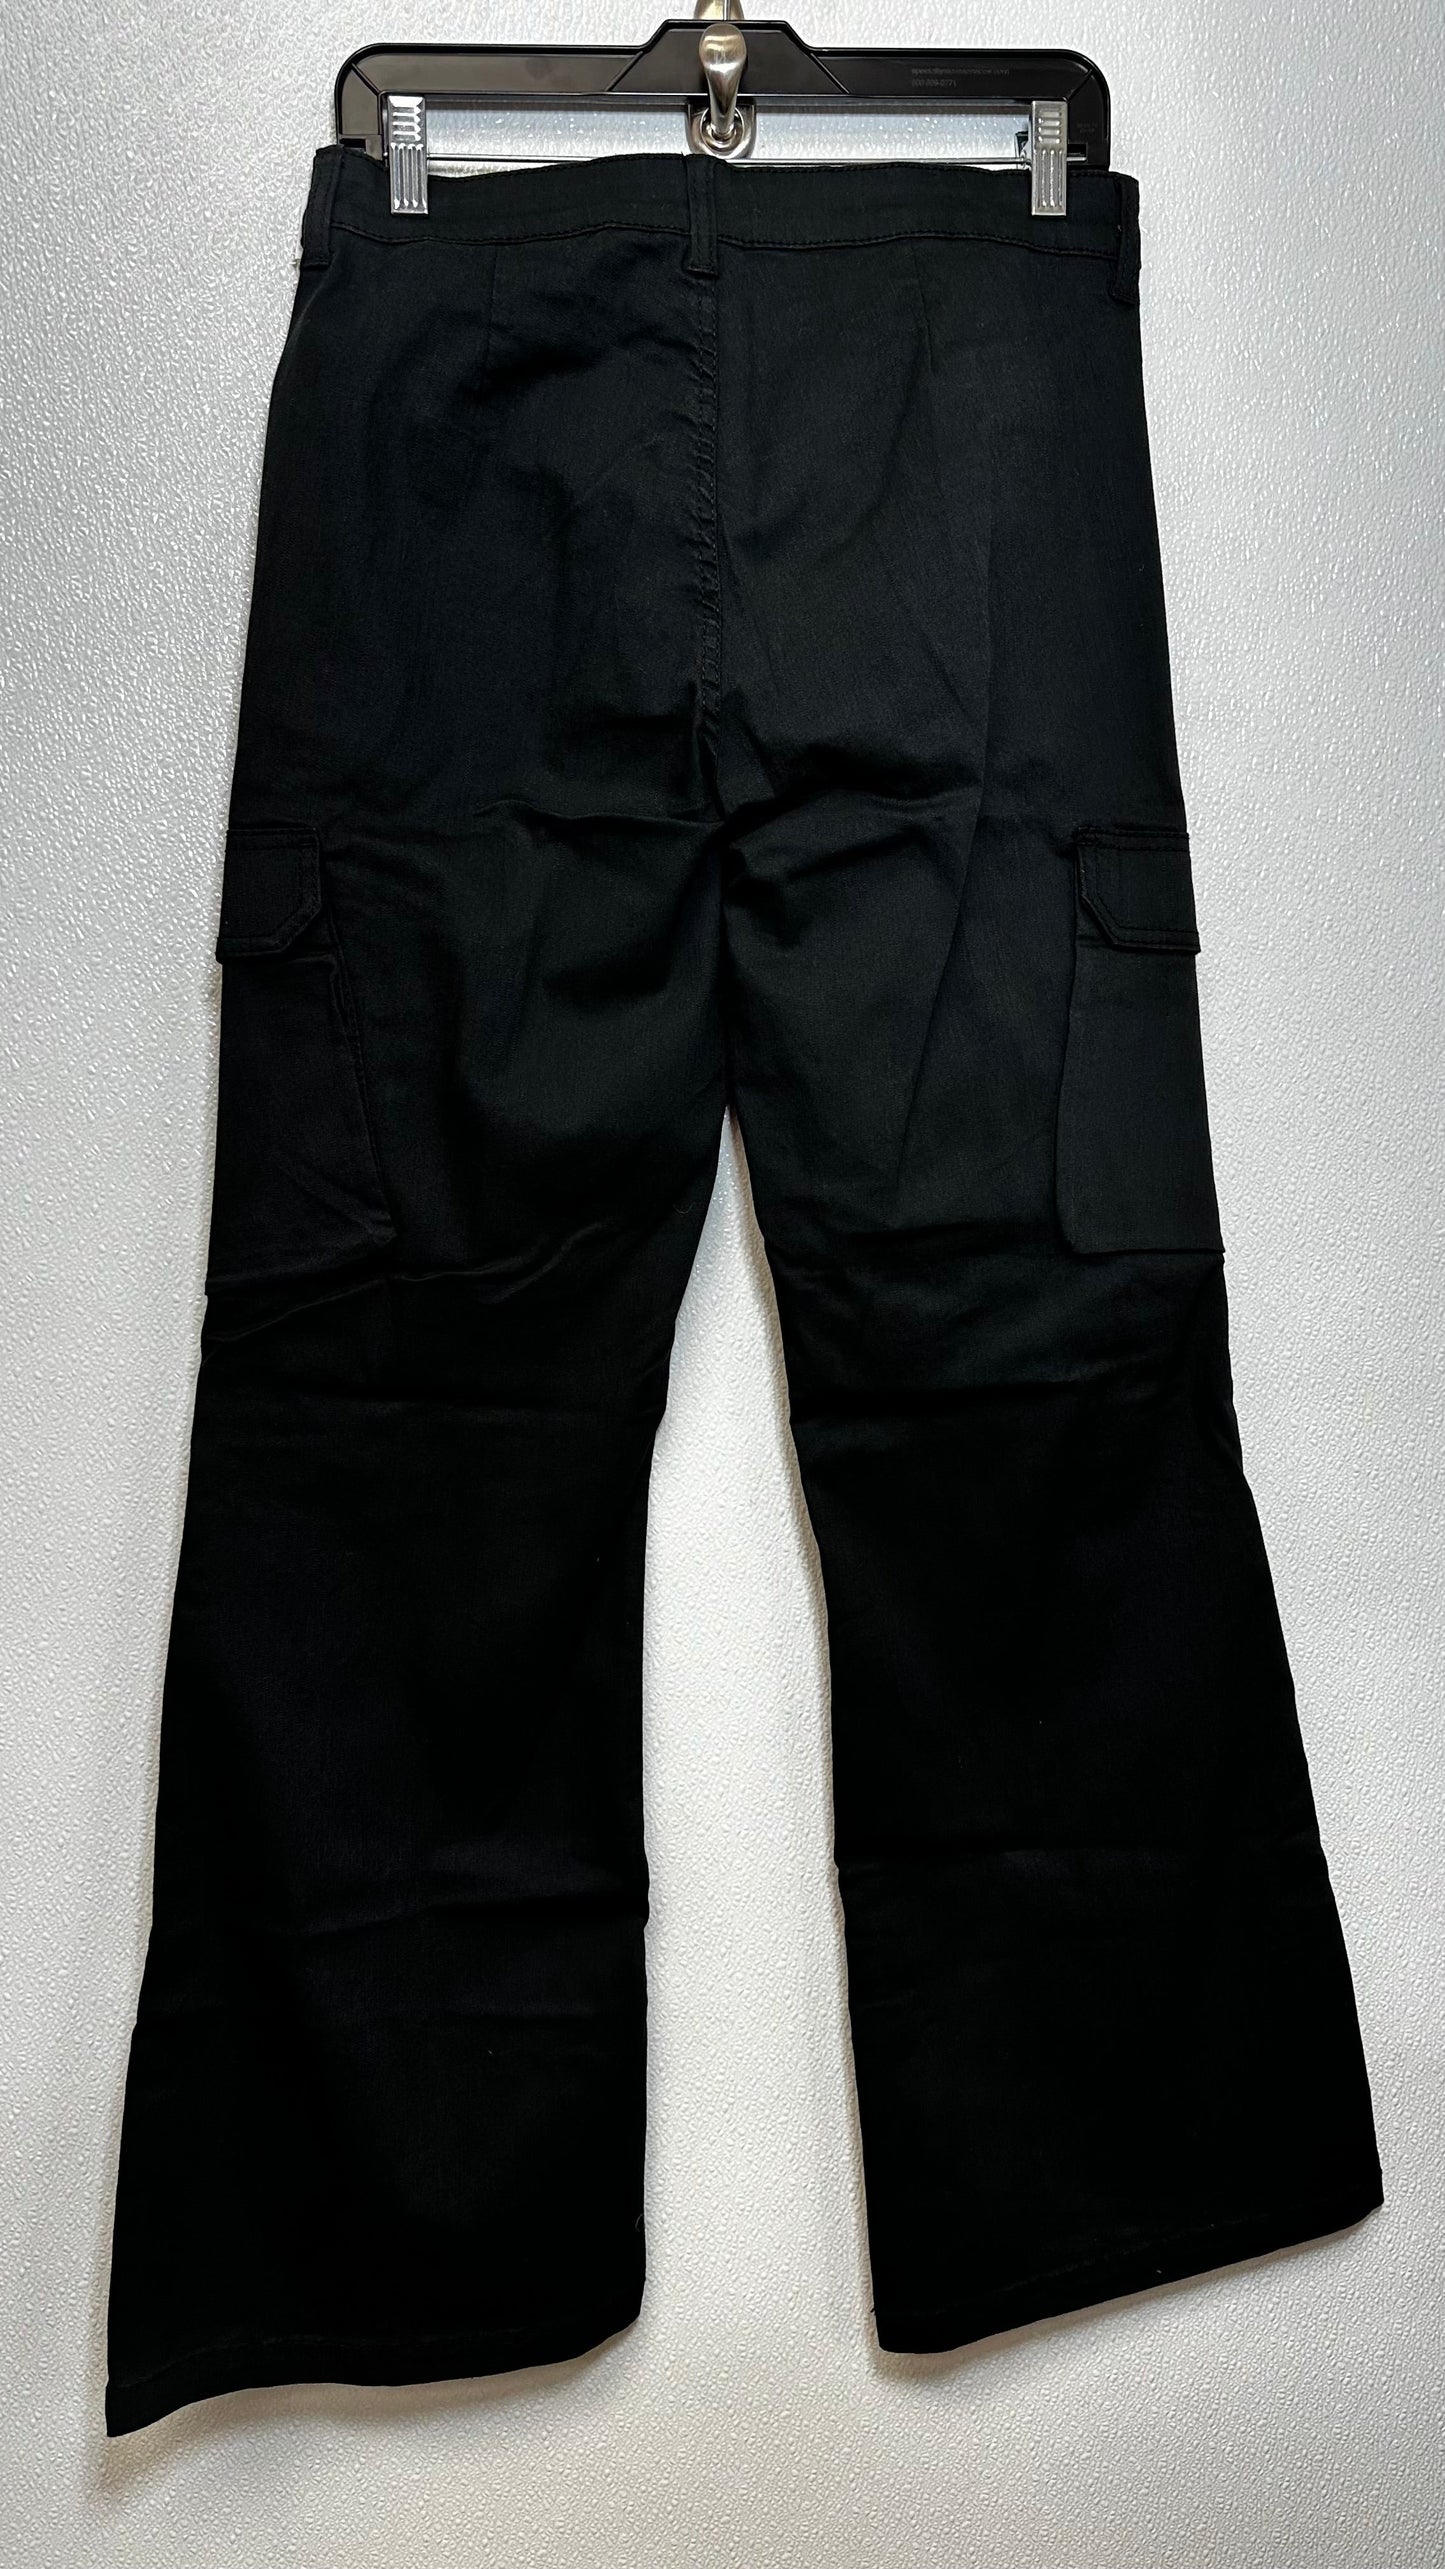 Black Pants Ankle Divided, Size 10